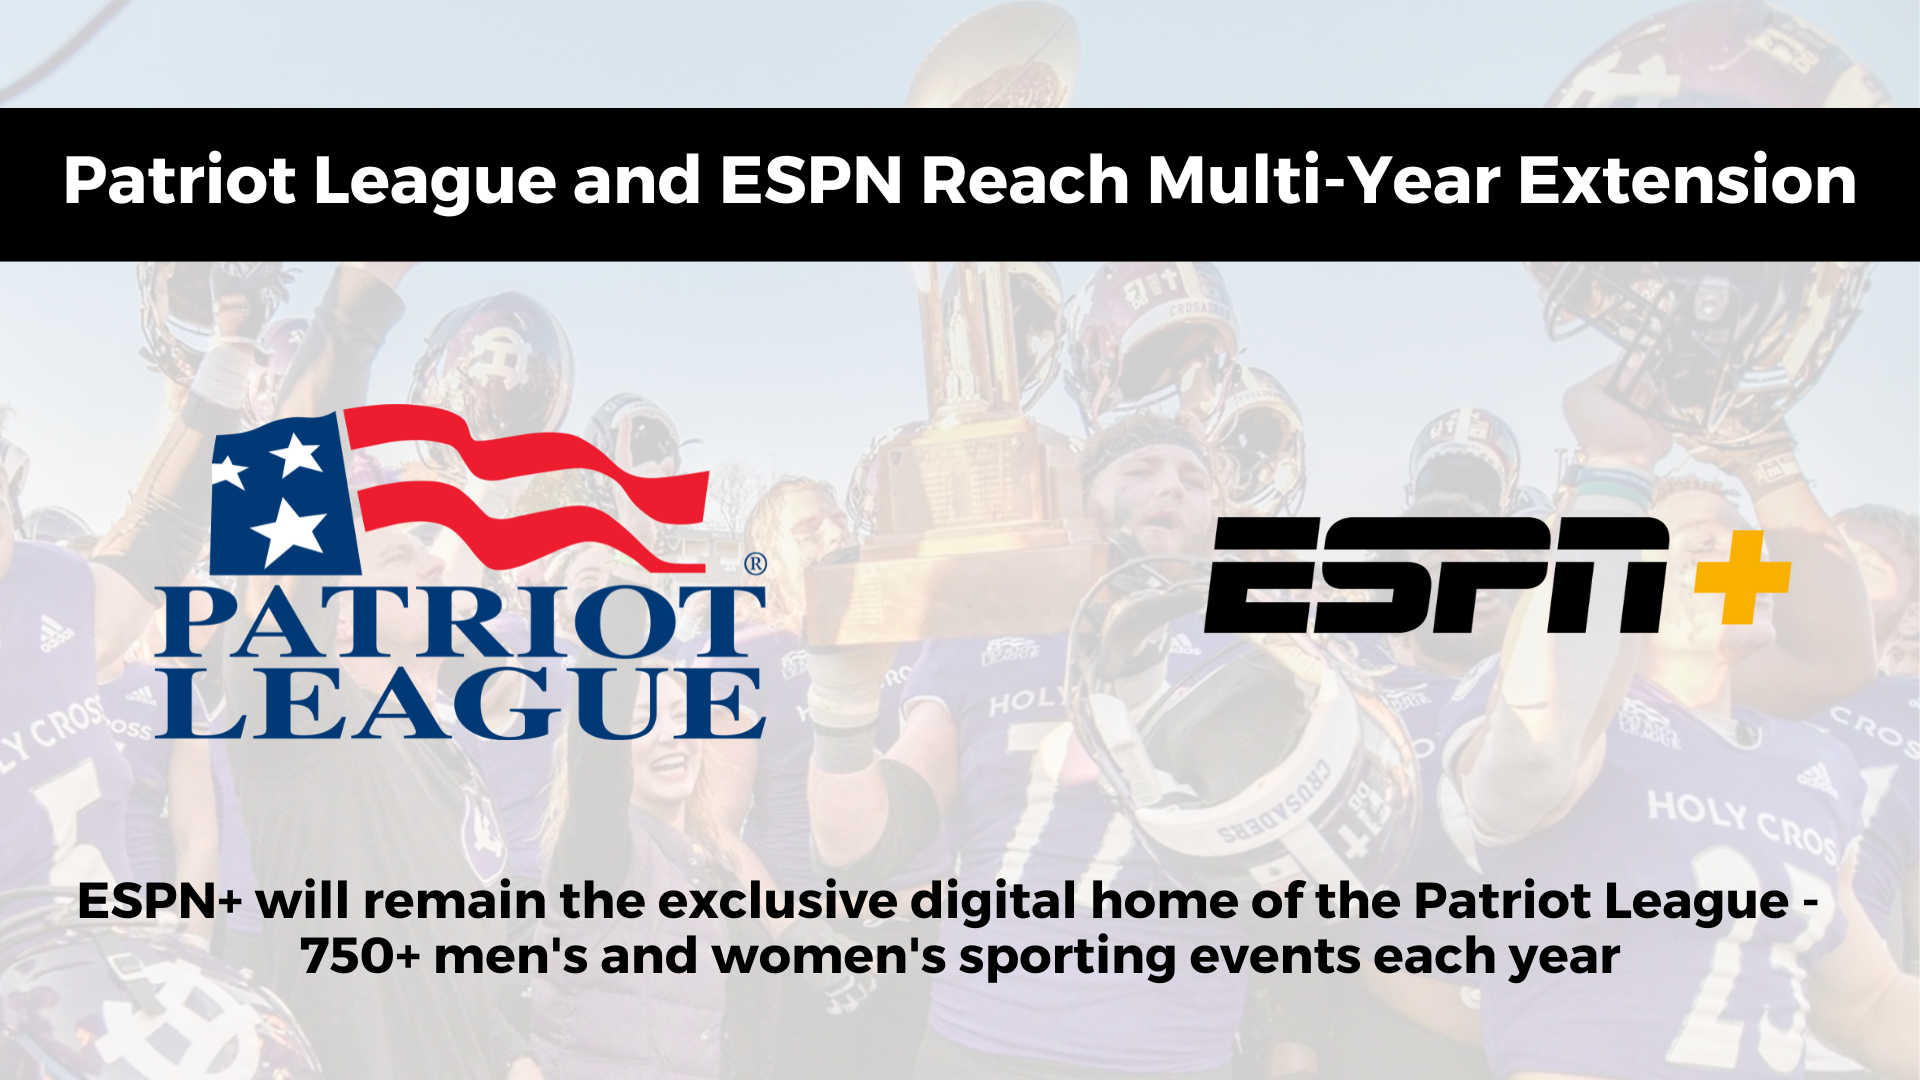 Patriot League and ESPN Reach Multi-Year Extension to Continue Live Game Coverage